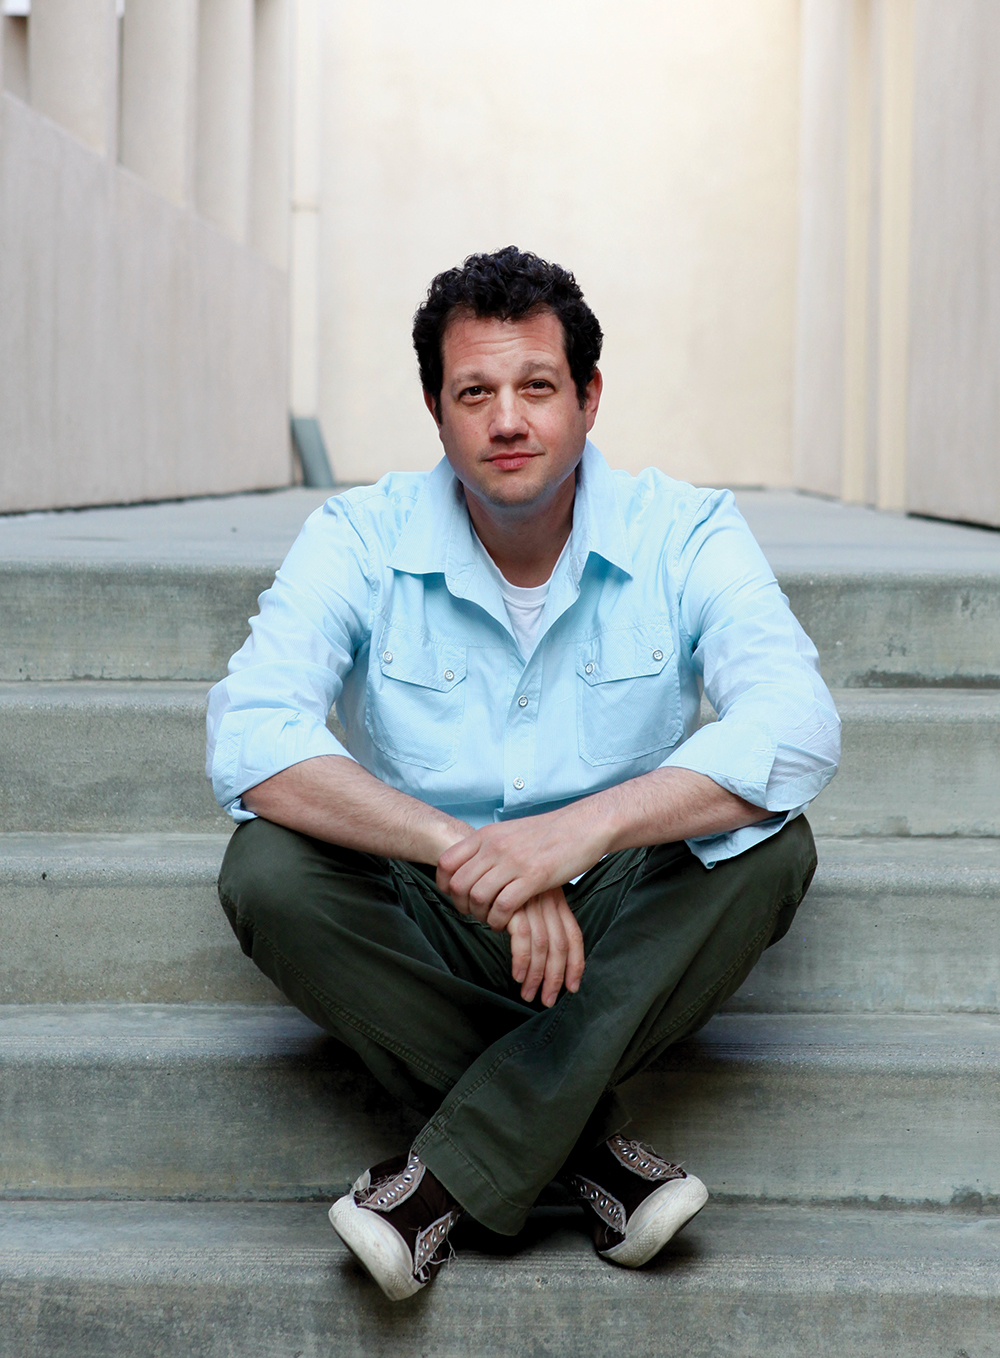 Michael Giacchino is photographed on April 6, 2011 in Burbank, Calif. (Photo by Deborah Coleman / Pixar)